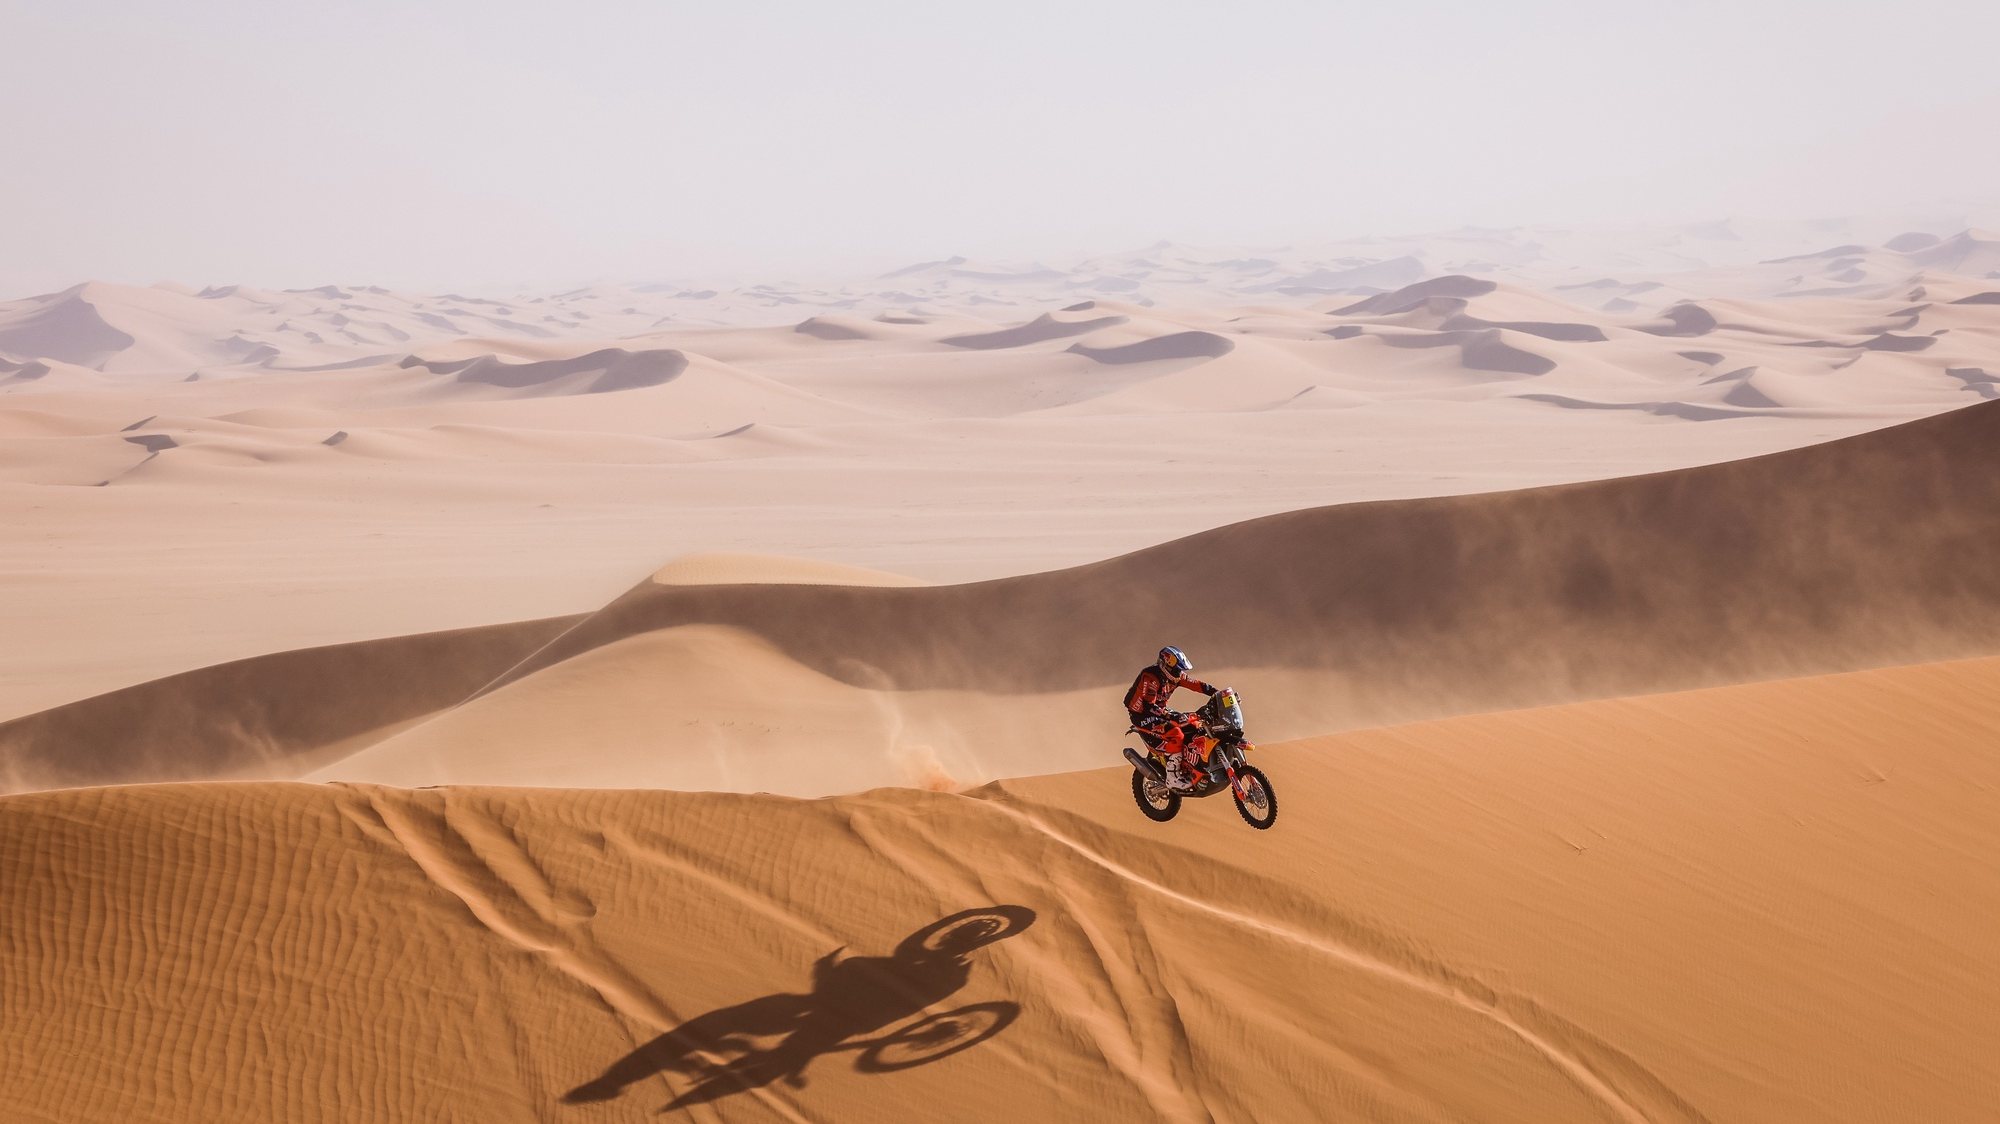 epa08920178 A handout photo made available by ASO of Toby Price of Australia, KTM, Red Bull KTM Factory Team, in action during the 3rd stage of the Dakar 2021 with start and finish in Wadi Al Dawasir, in Saudi Arabia on January 5, 2021,  EPA/Frederic Le Floch HANDOUT via ASO SHUTTERSTOCK OUT HANDOUT EDITORIAL USE ONLY/NO SALES/NO ARCHIVES